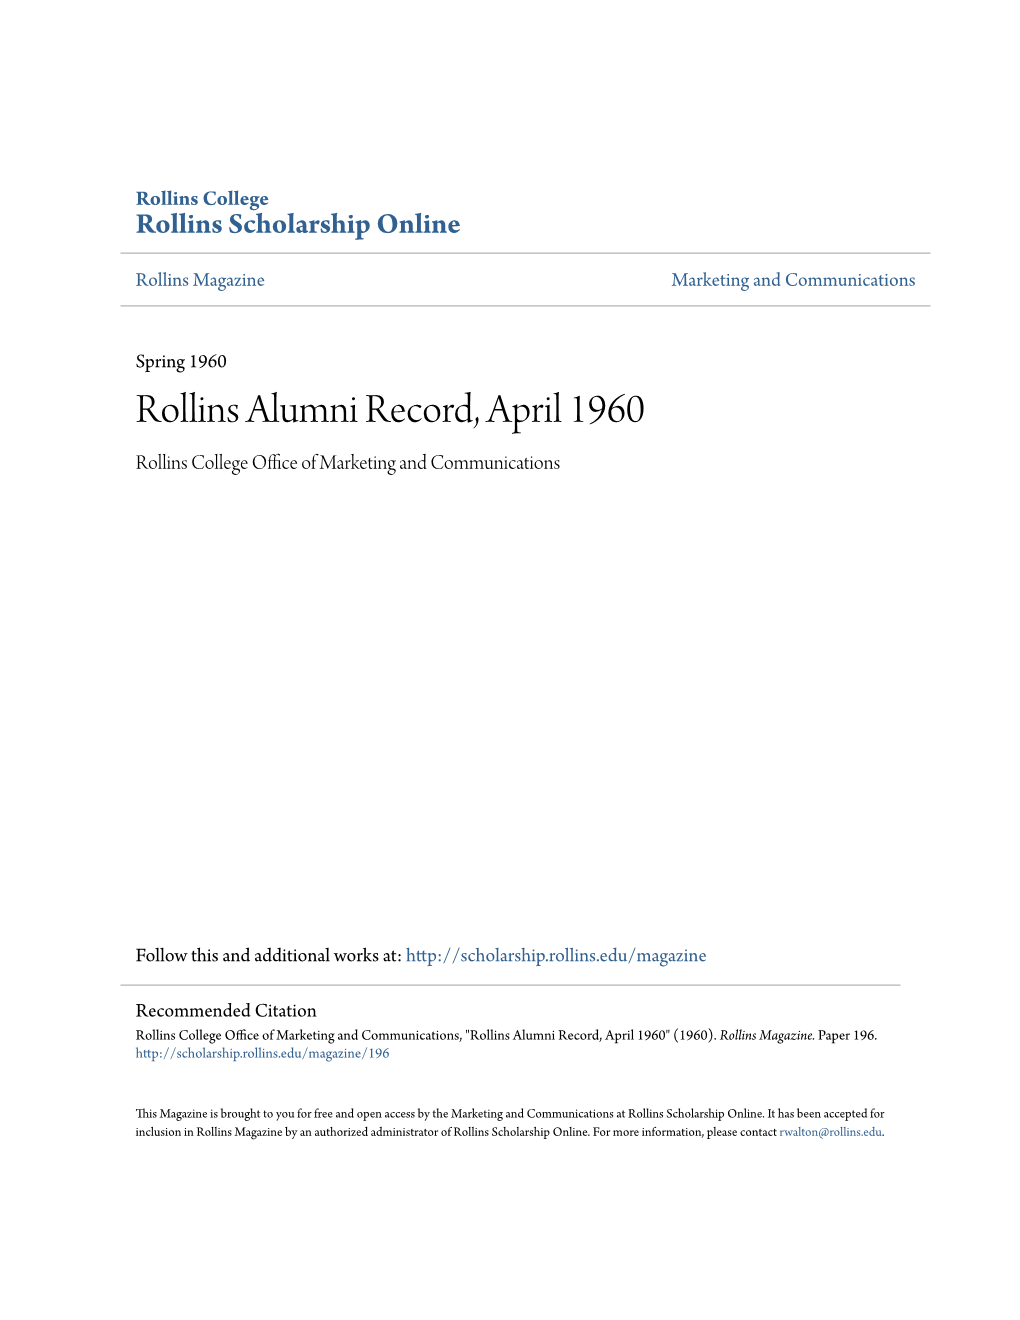 Rollins Alumni Record, April 1960 Rollins College Office Ofa M Rketing and Communications